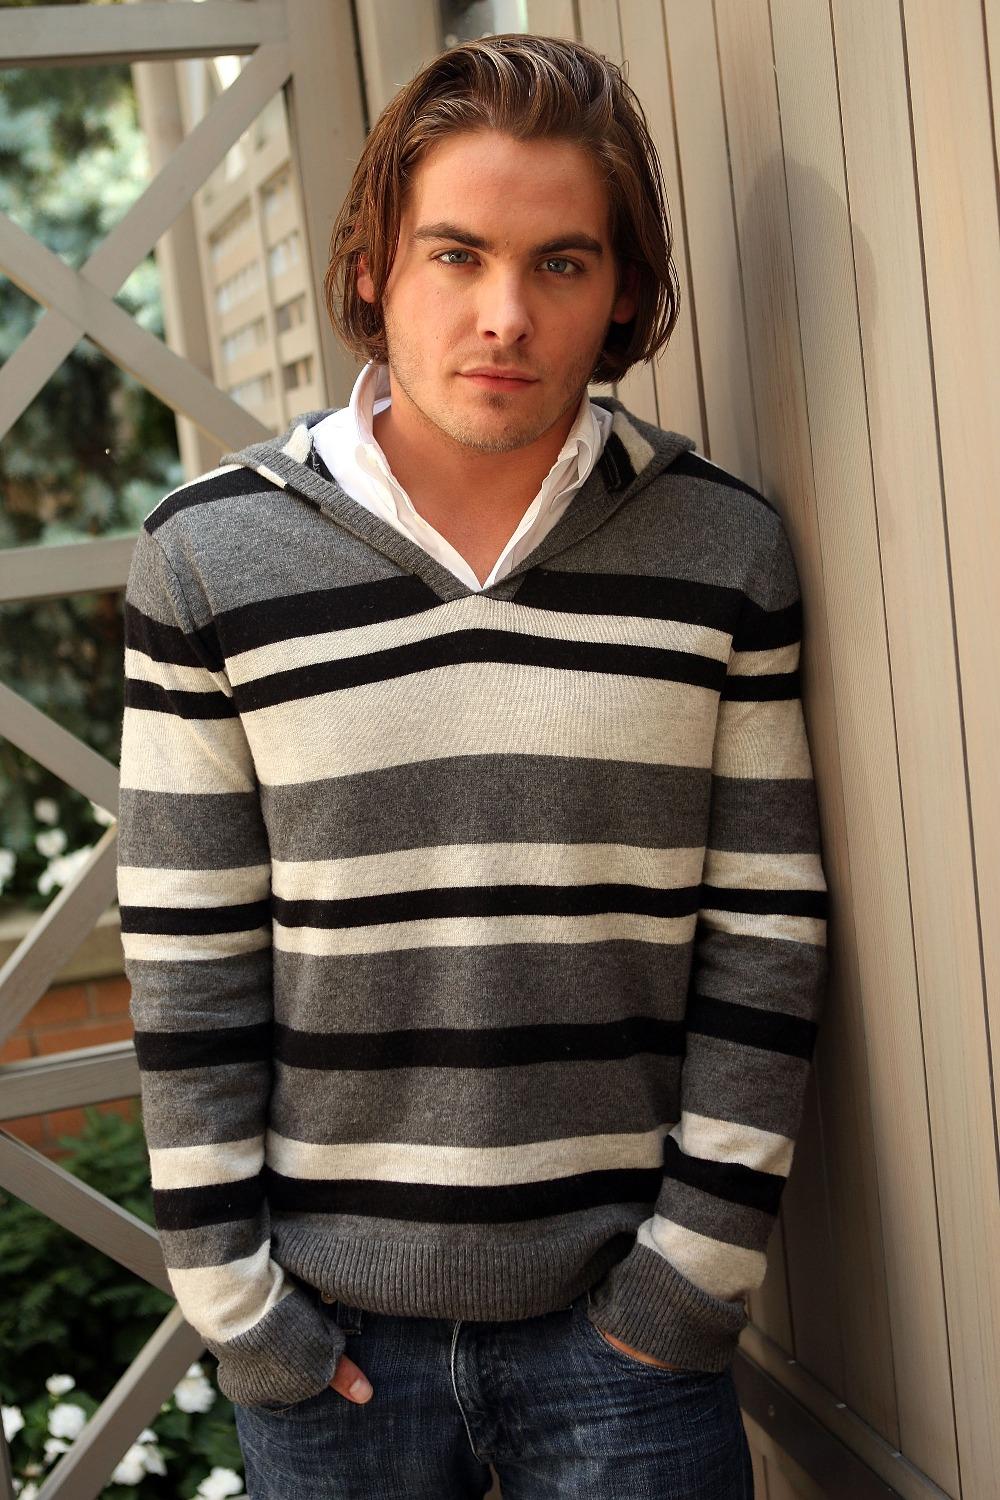 Photo №8251 Kevin Zegers.